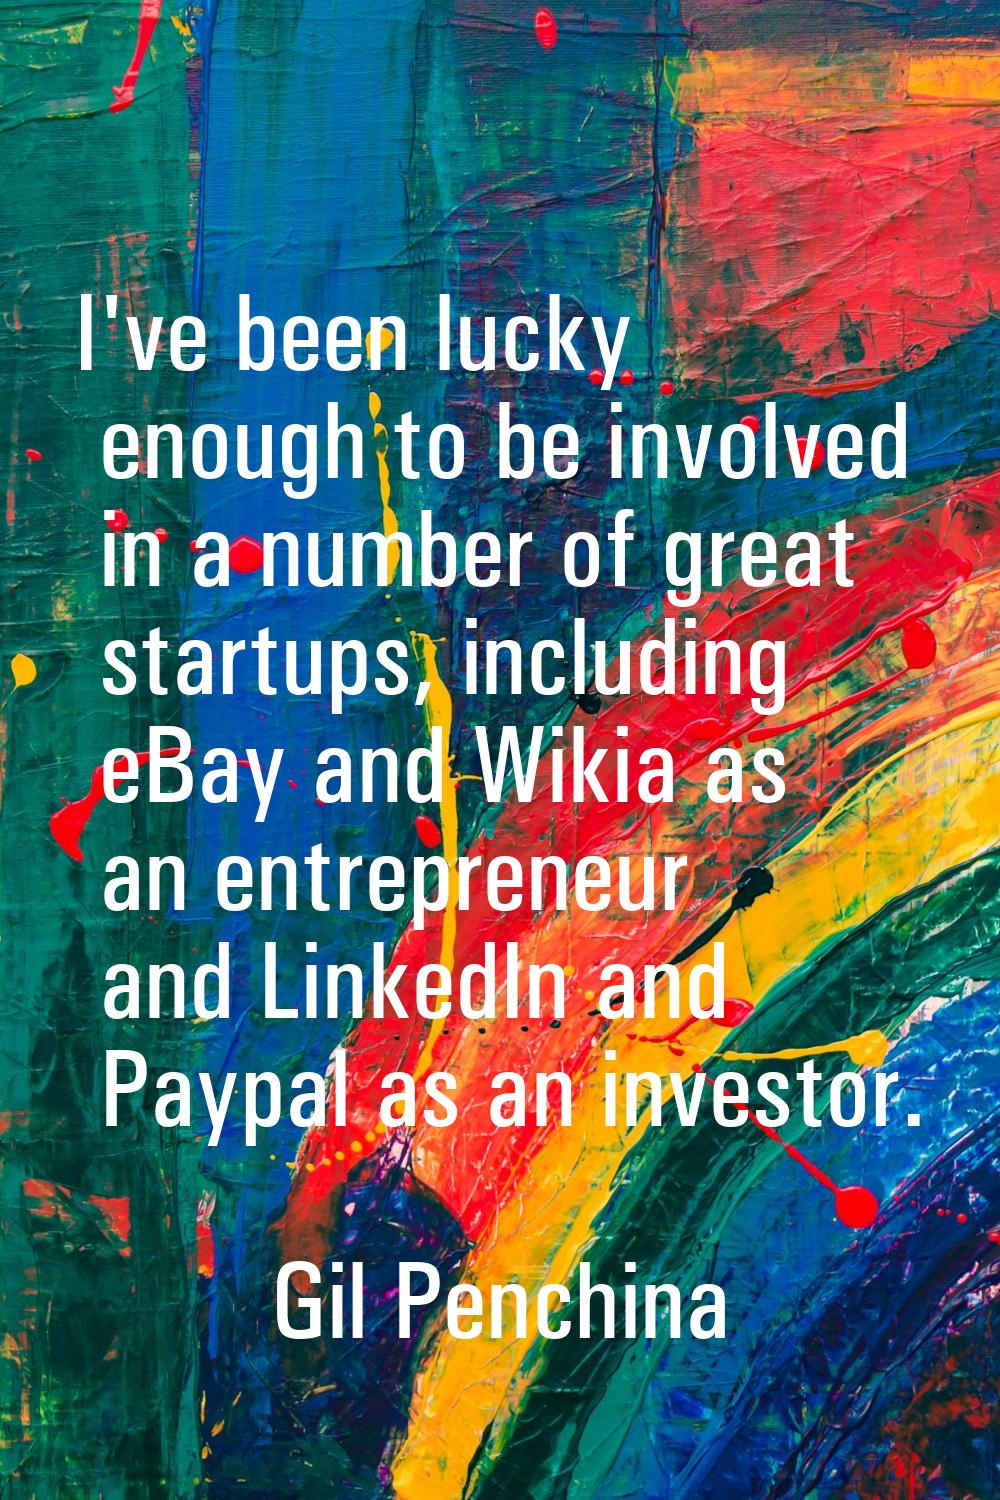 I've been lucky enough to be involved in a number of great startups, including eBay and Wikia as an